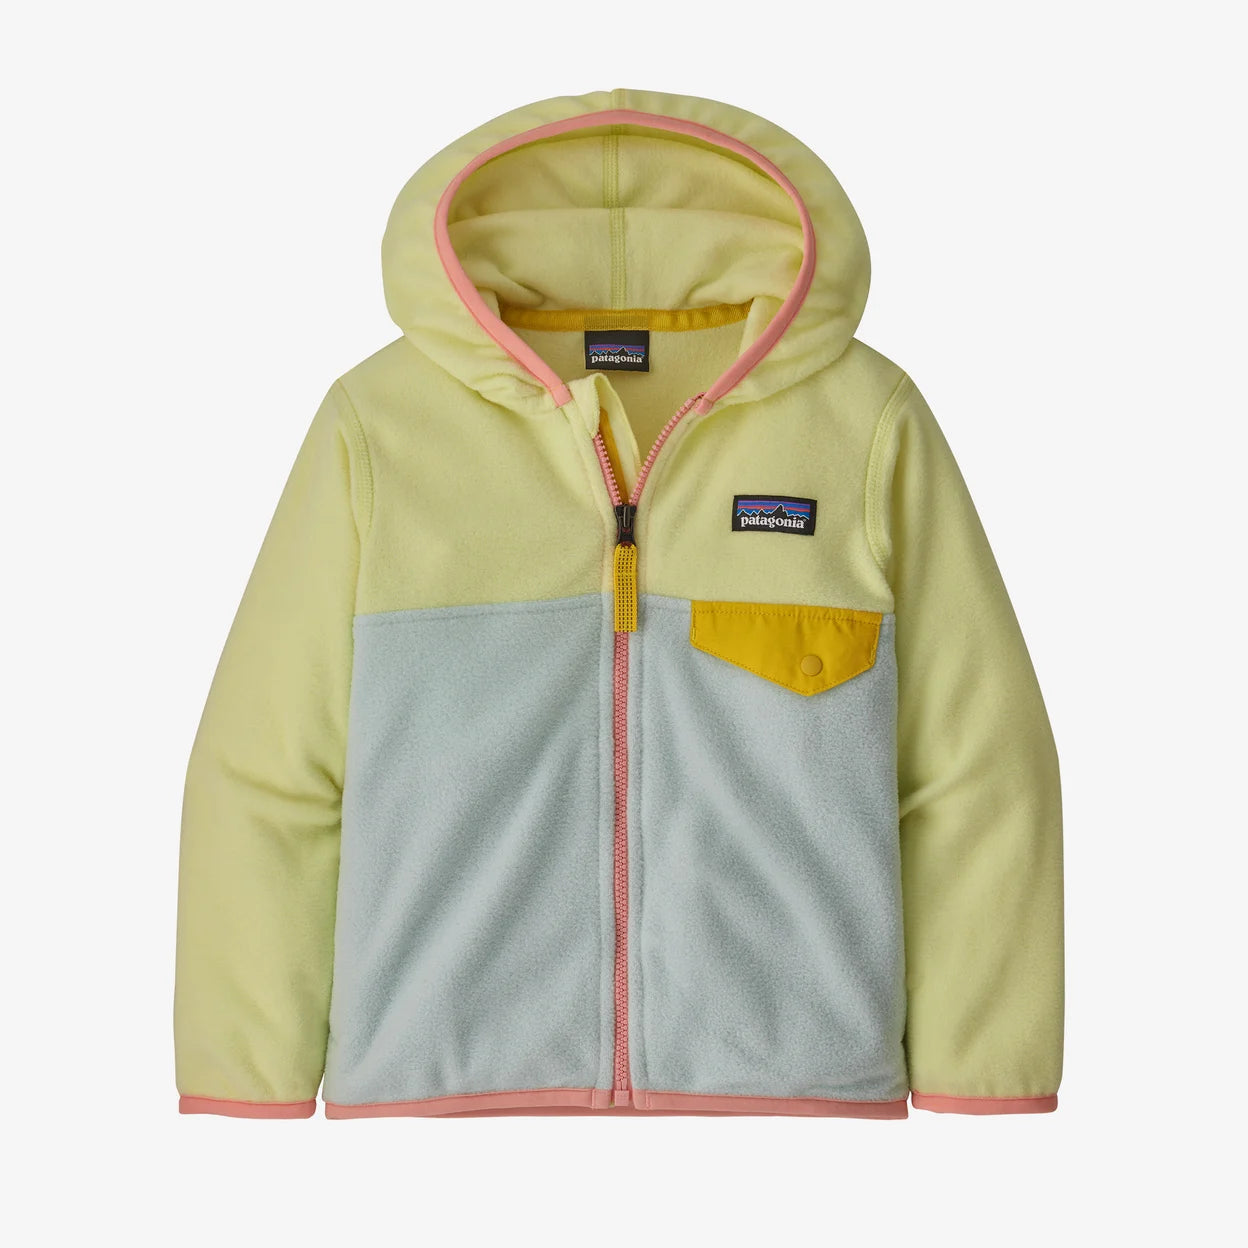 Patagonia Micro D Snap-T Jacket - Infants to Children